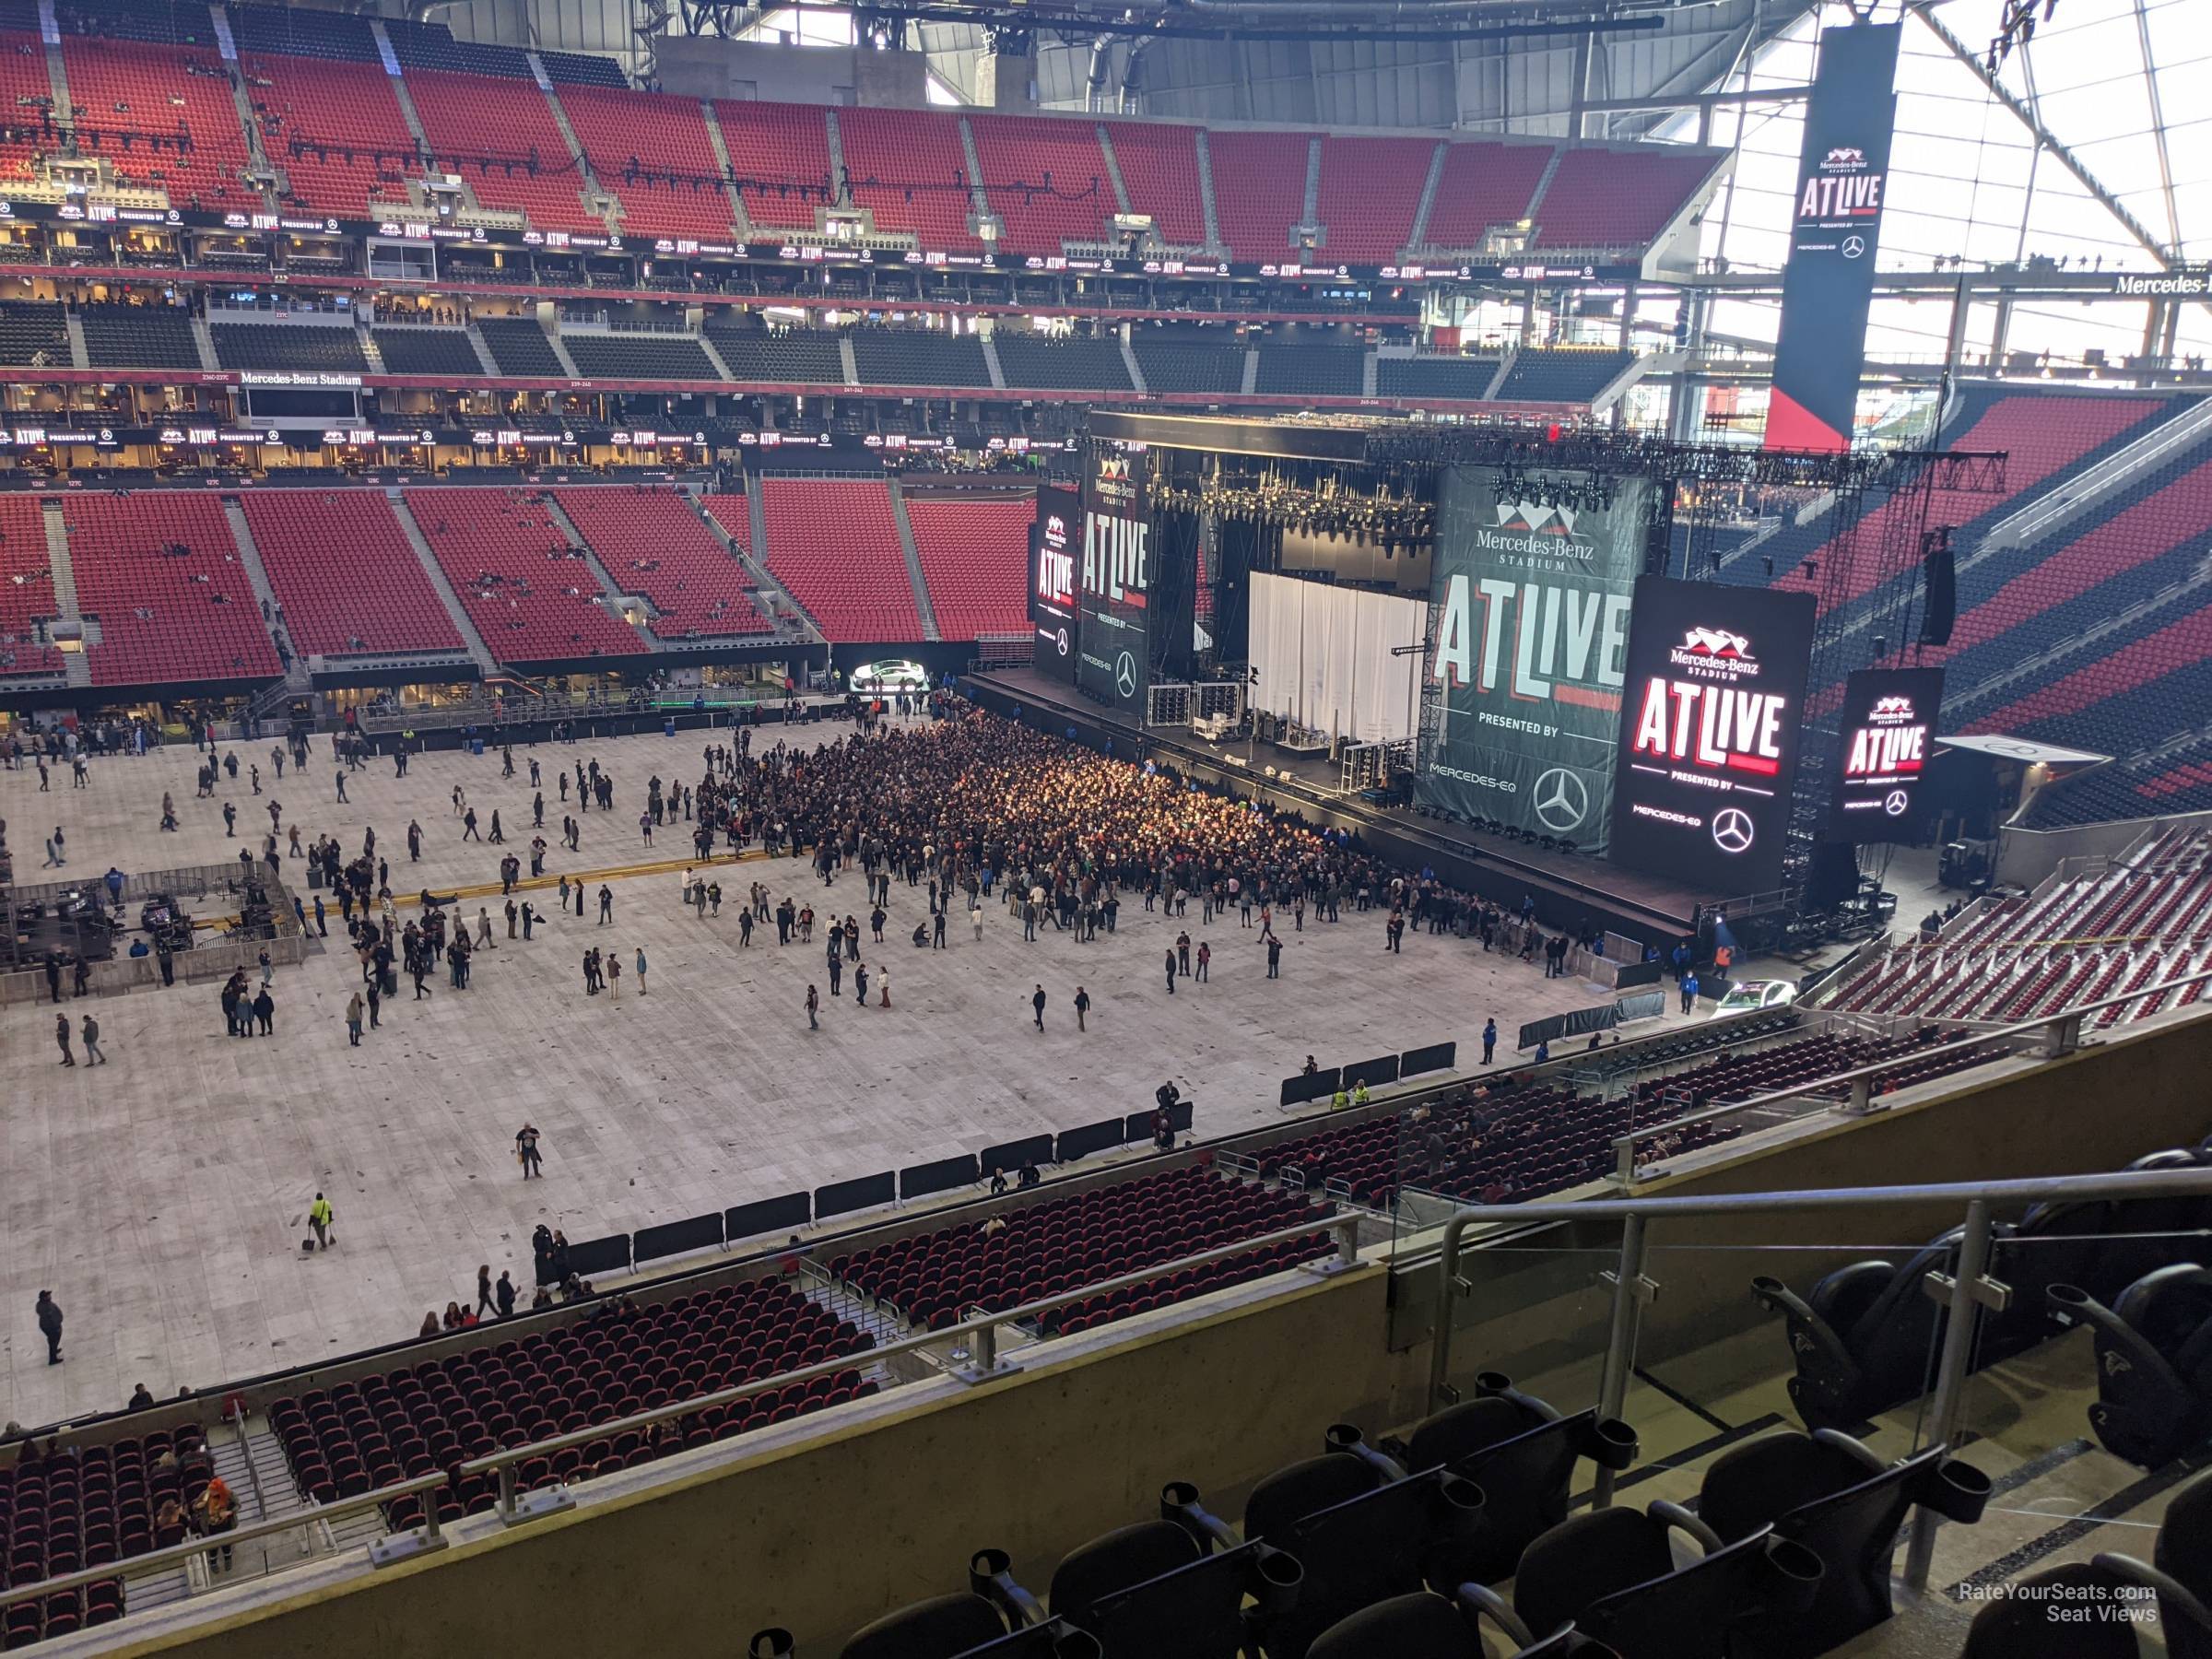 section 213, row 5 seat view  for concert - mercedes-benz stadium